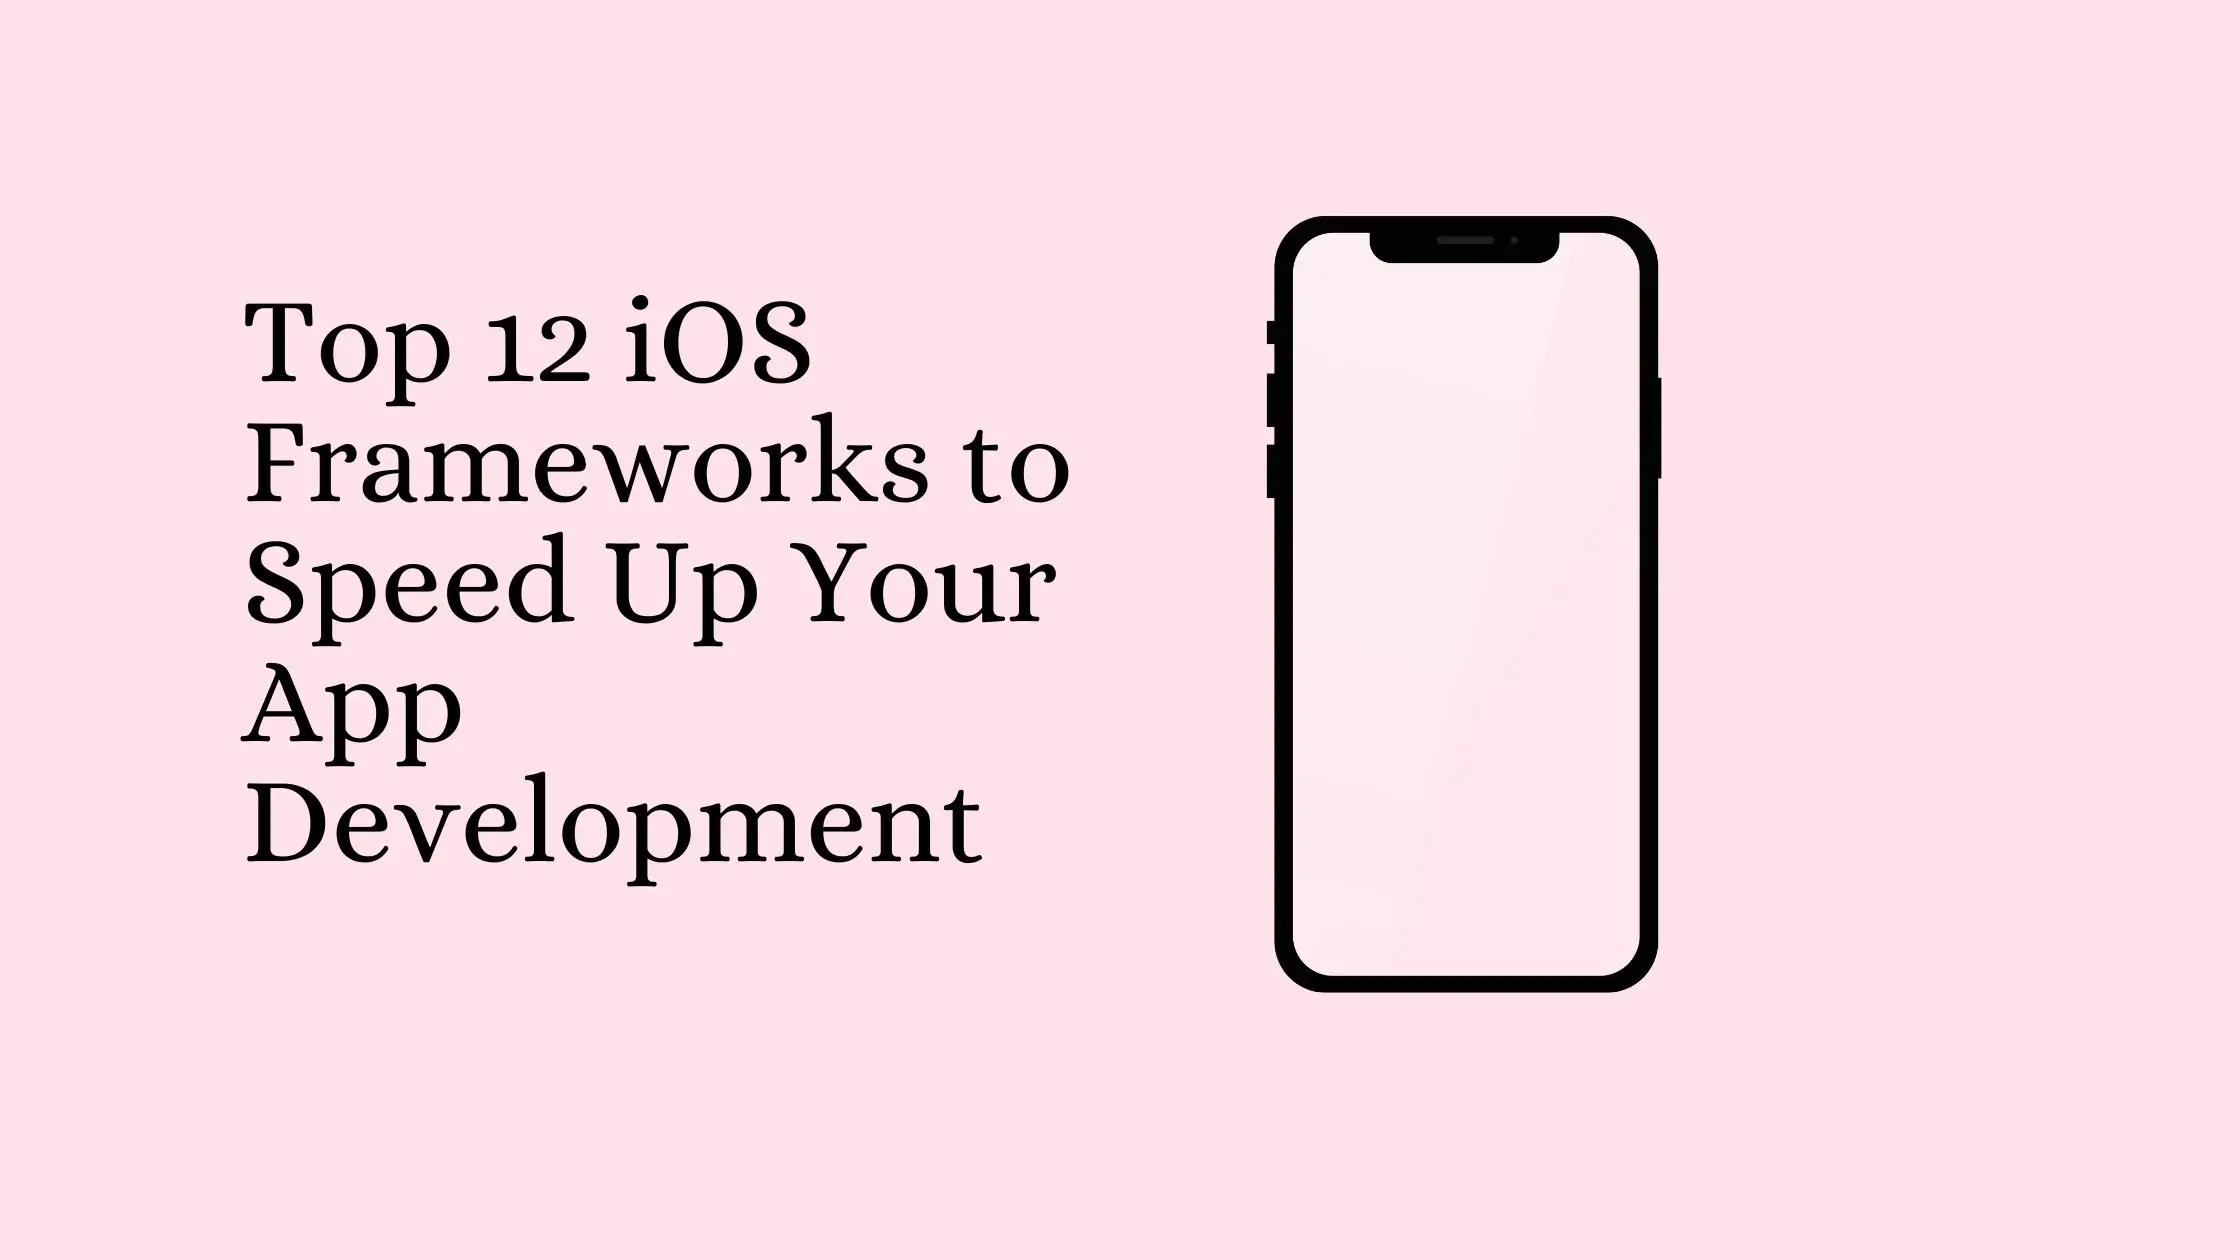 Top-12-iOS-Frameworks-to-Speed-Up-Your-App-Development (1)